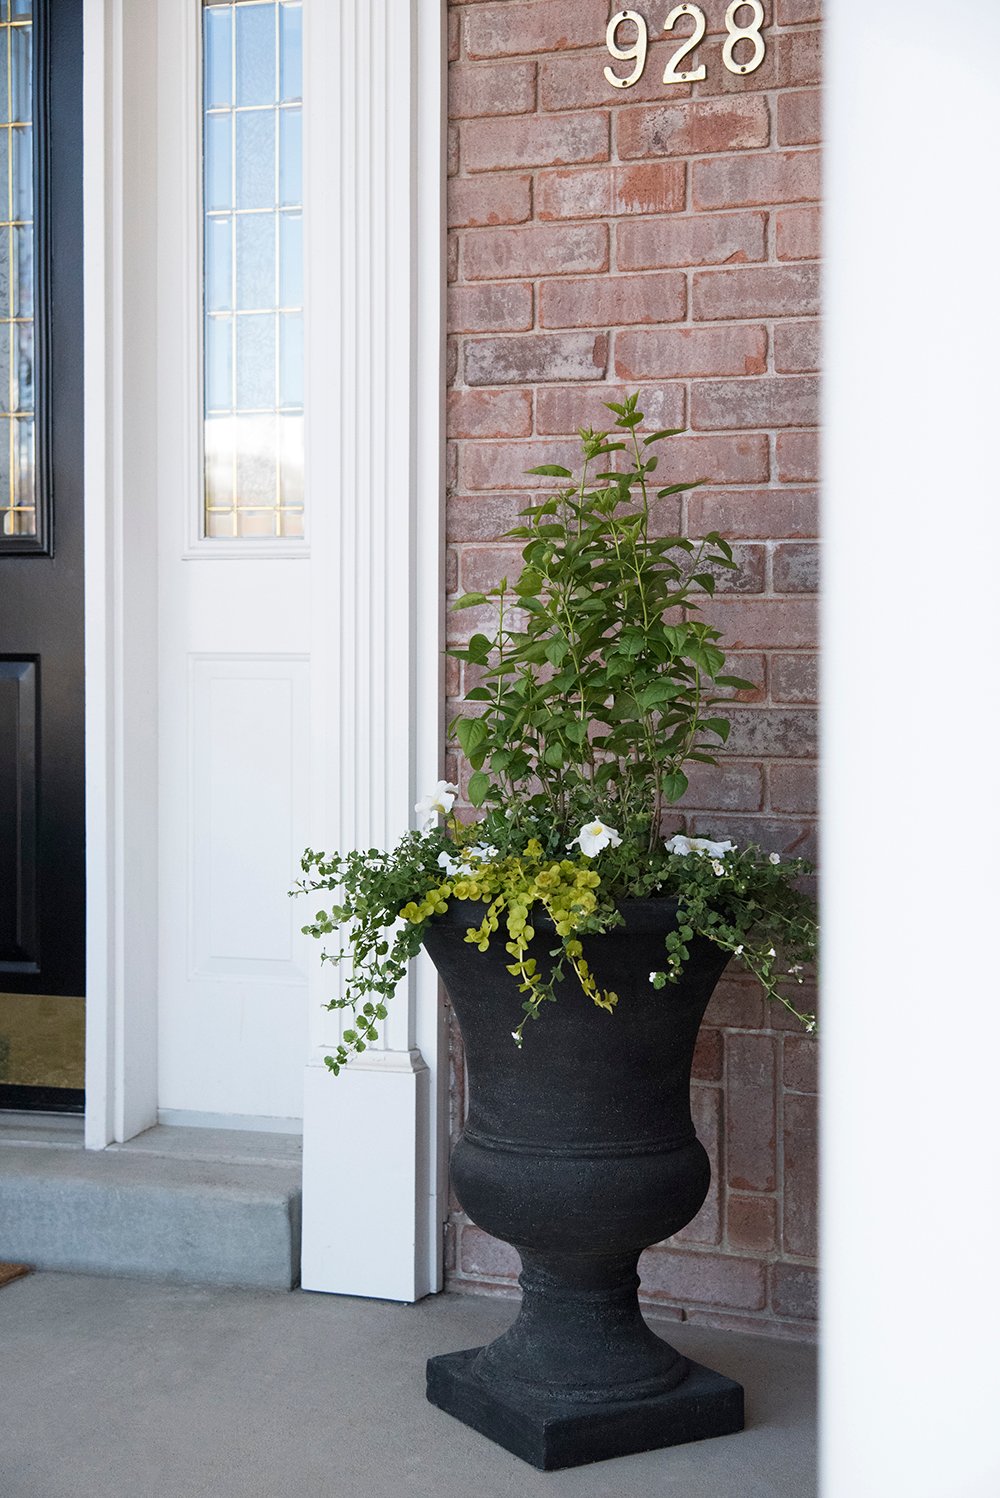 Textural Front Porch Planters - roomfortuesday.com